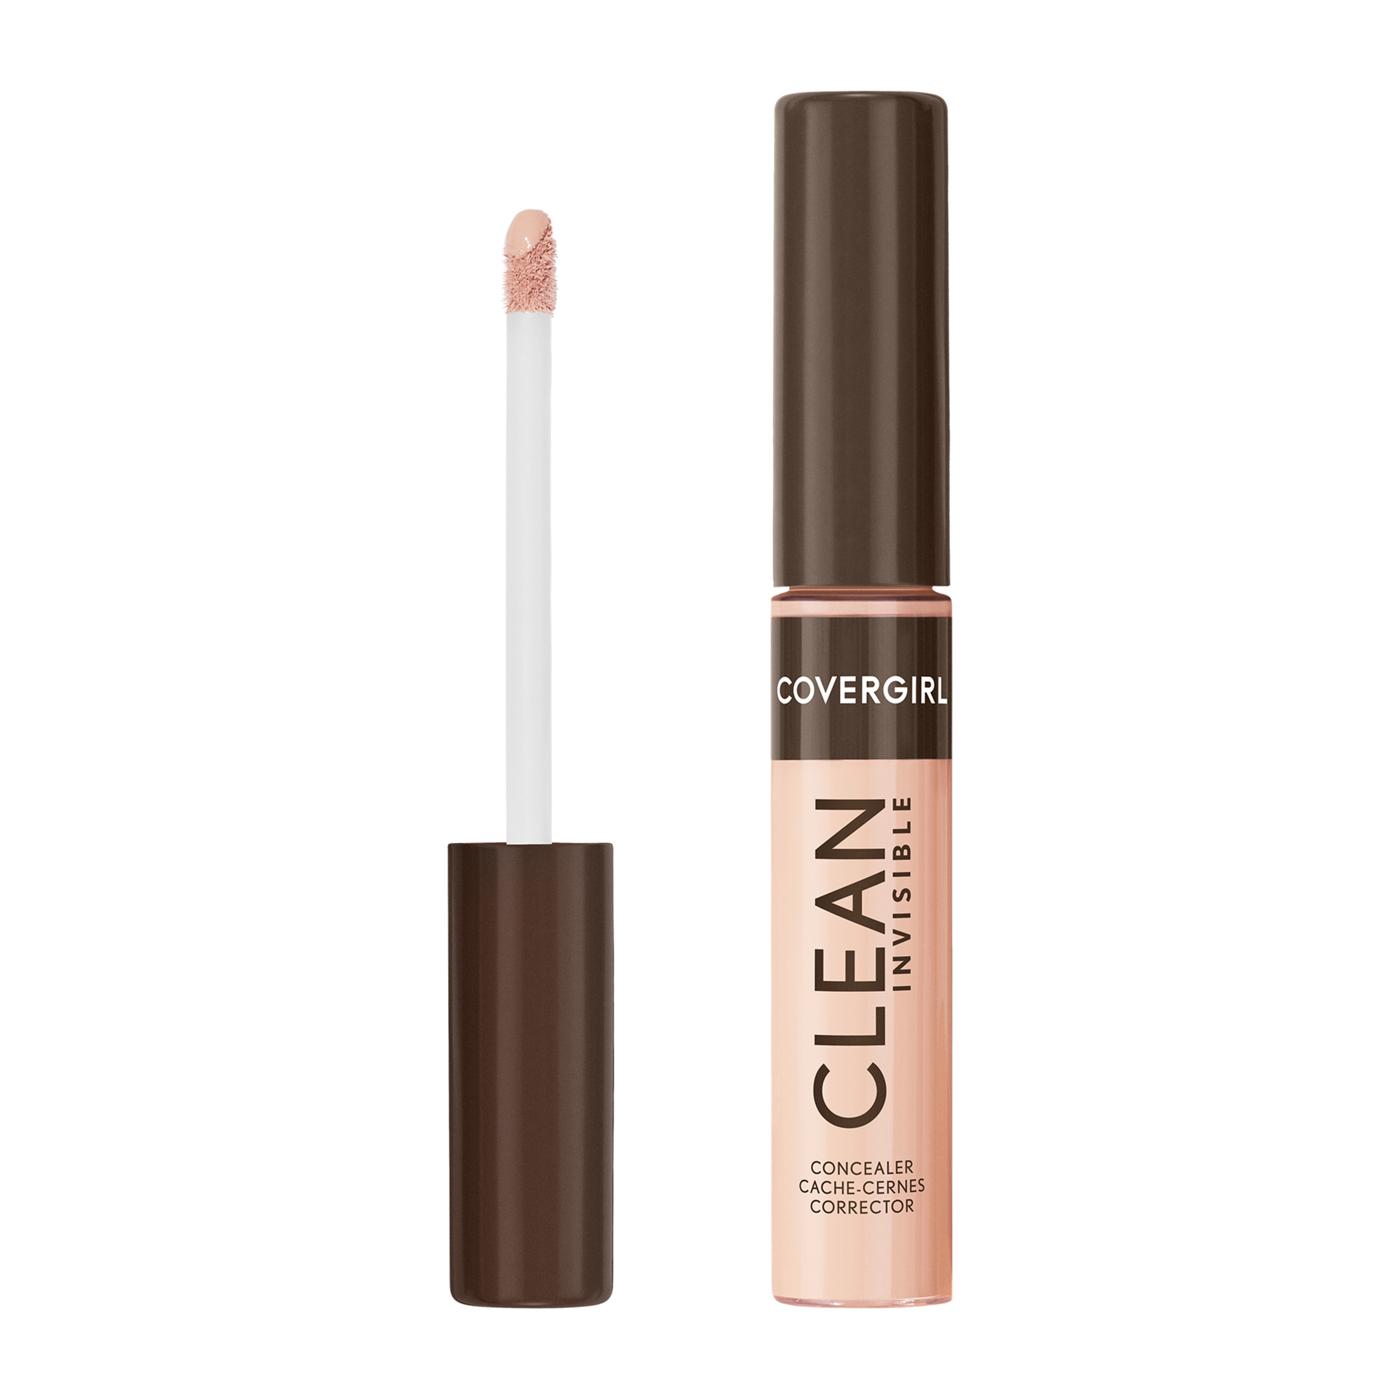 Covergirl Clean Invisible Concealer - Light Ivory; image 7 of 15